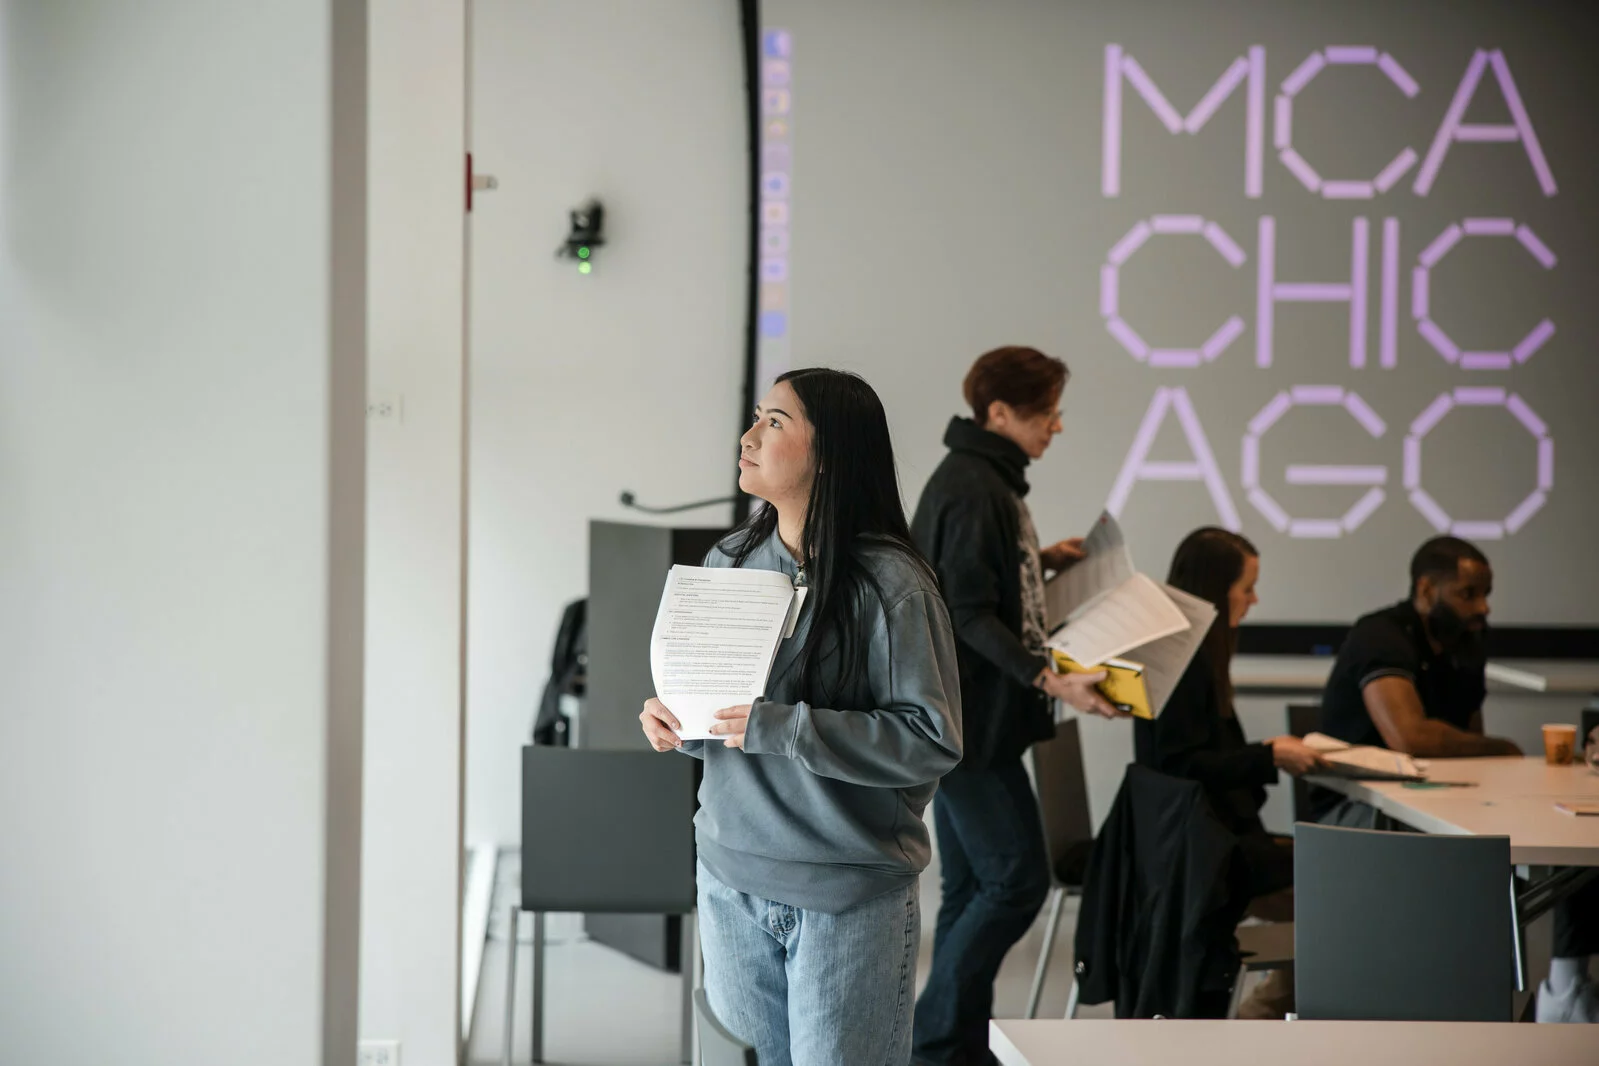 A woman stares up at something off camera while behind her a group of people gather at tables in front of a big screen displaying the MCA Chicago logo.